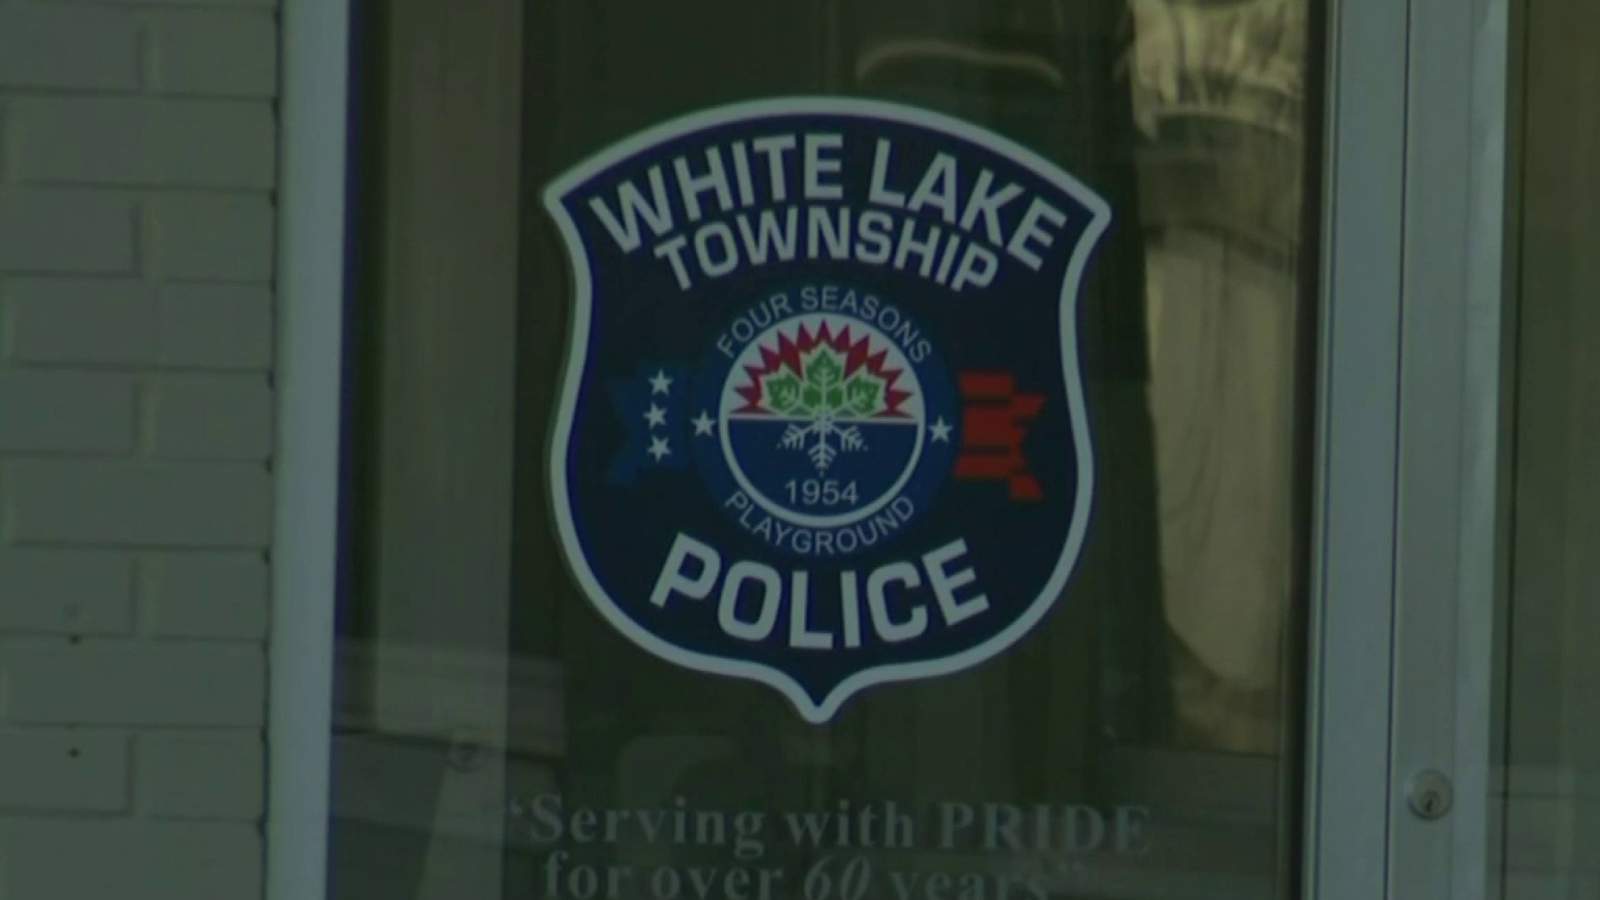 White Lake Township police say residents can have packages shipped to department to prevent theft